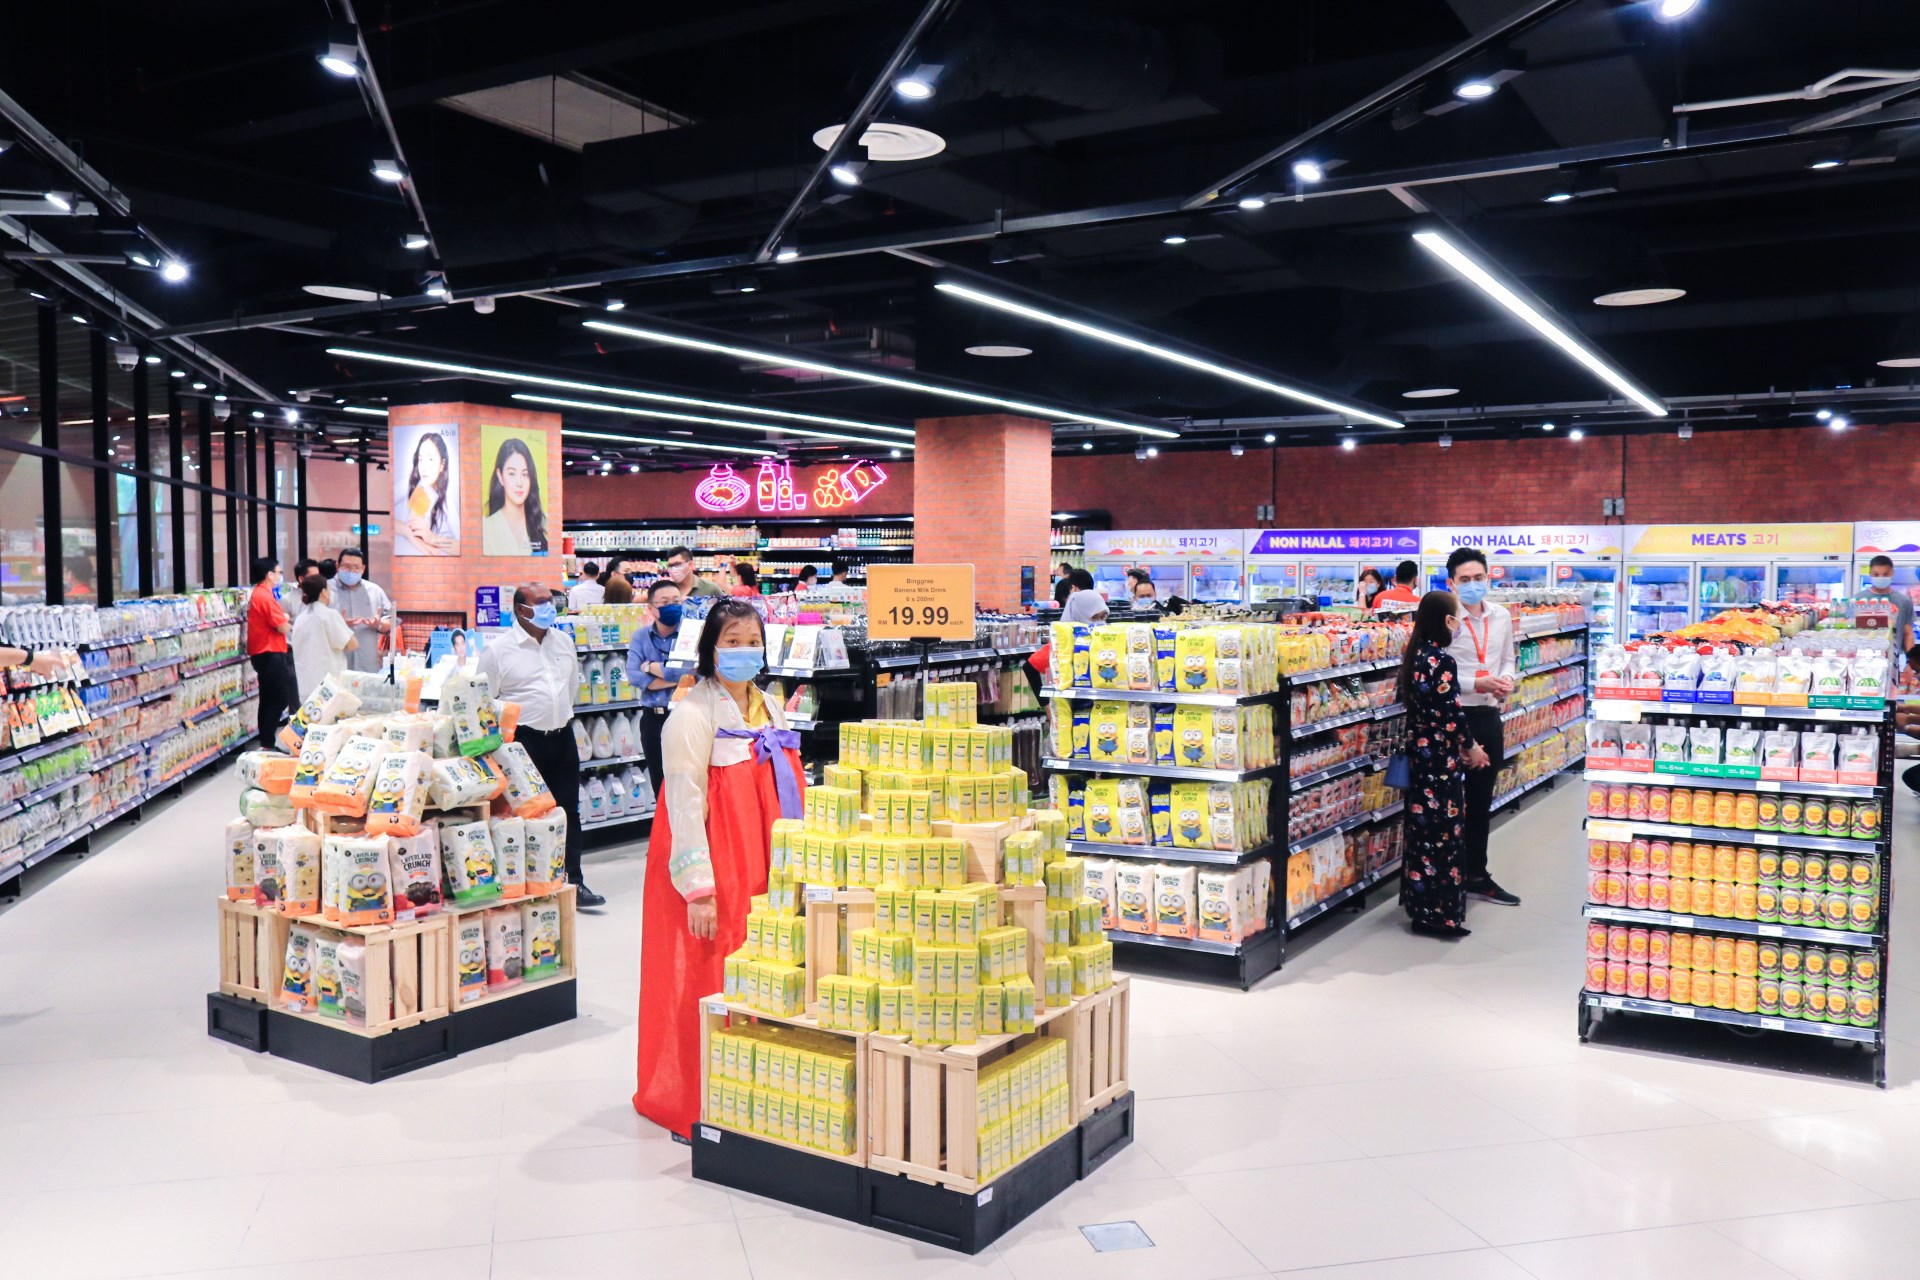 MCO in KL and Johor, with updated SOPs - grocery